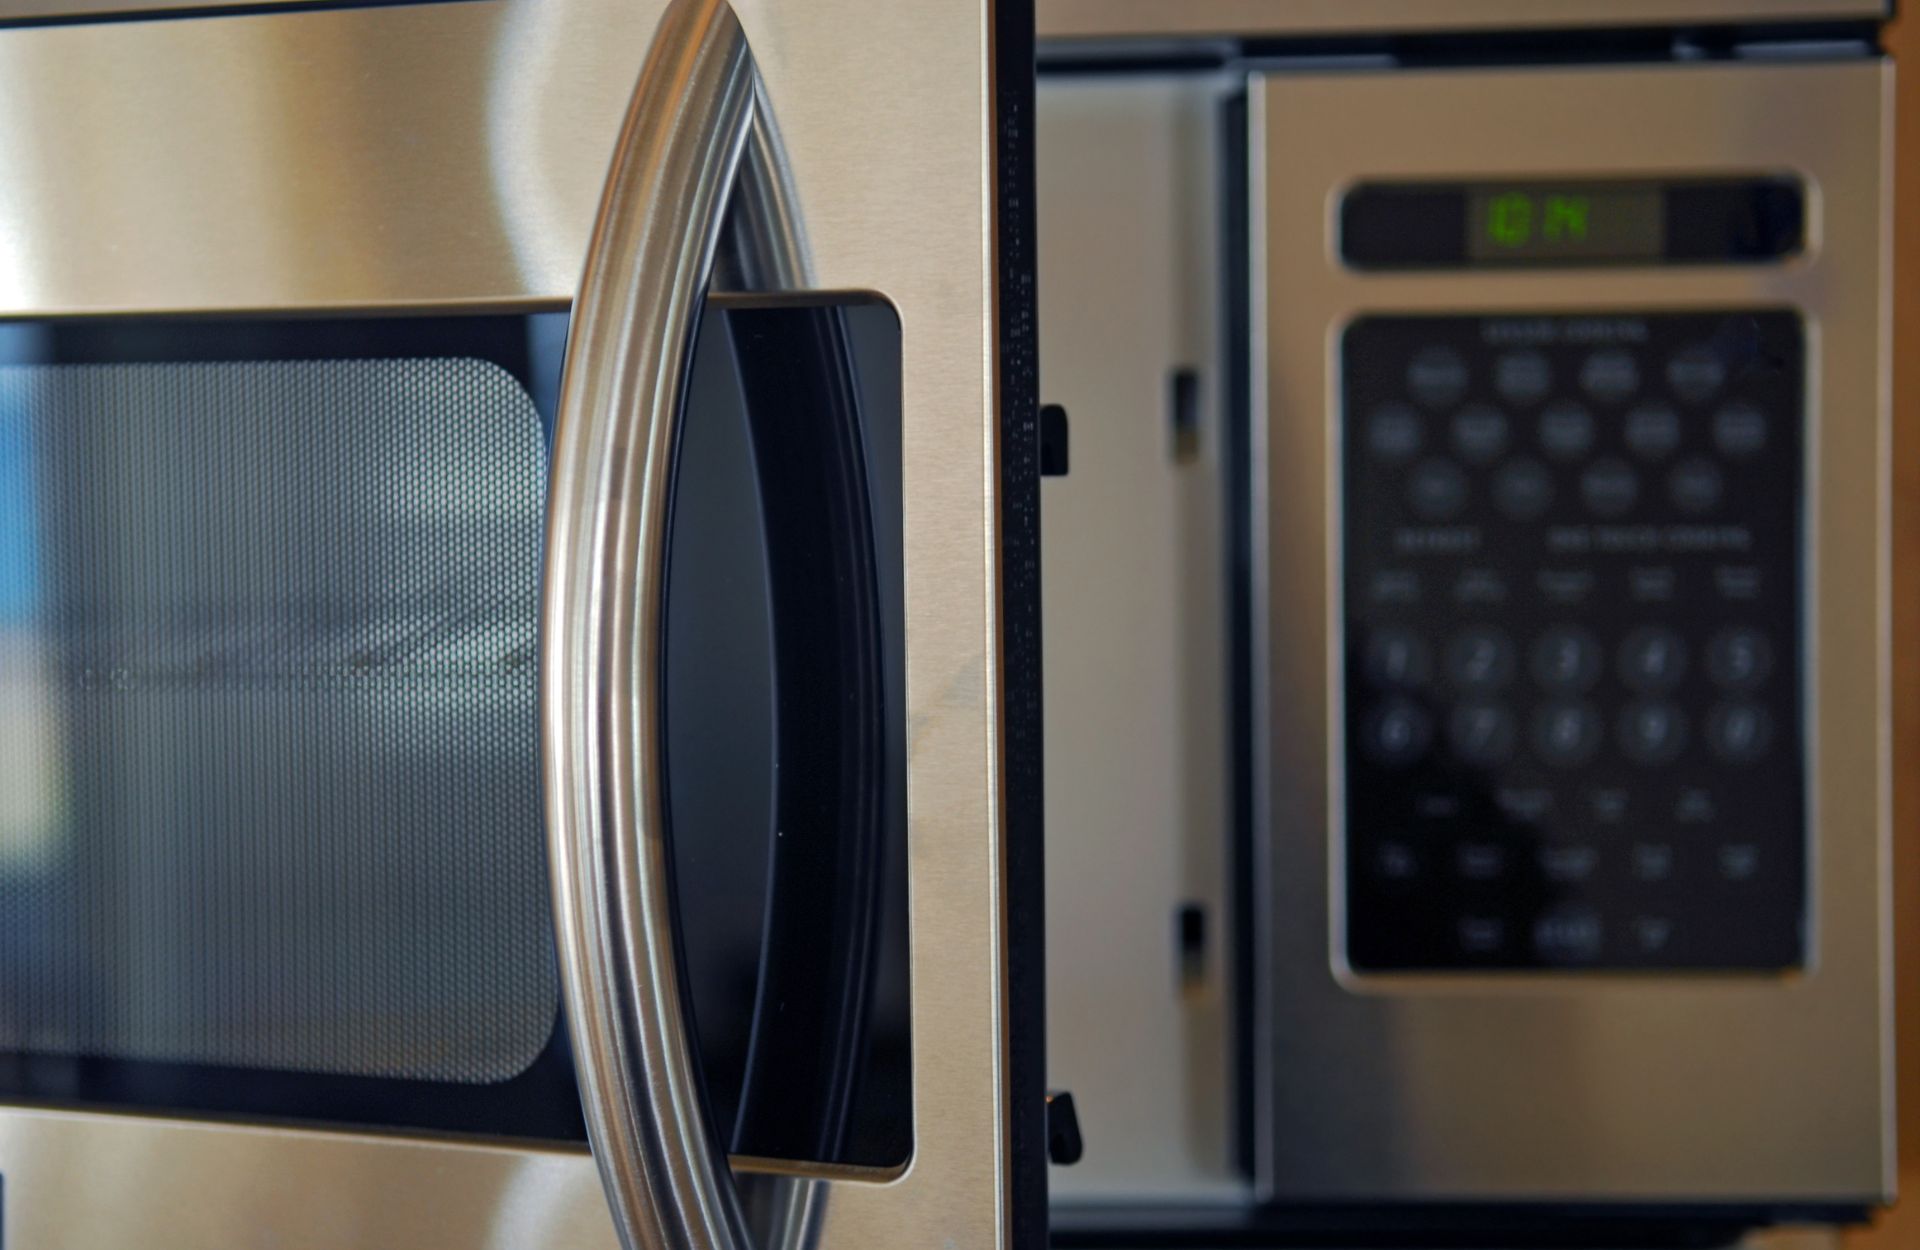 The Best Solo Microwaves